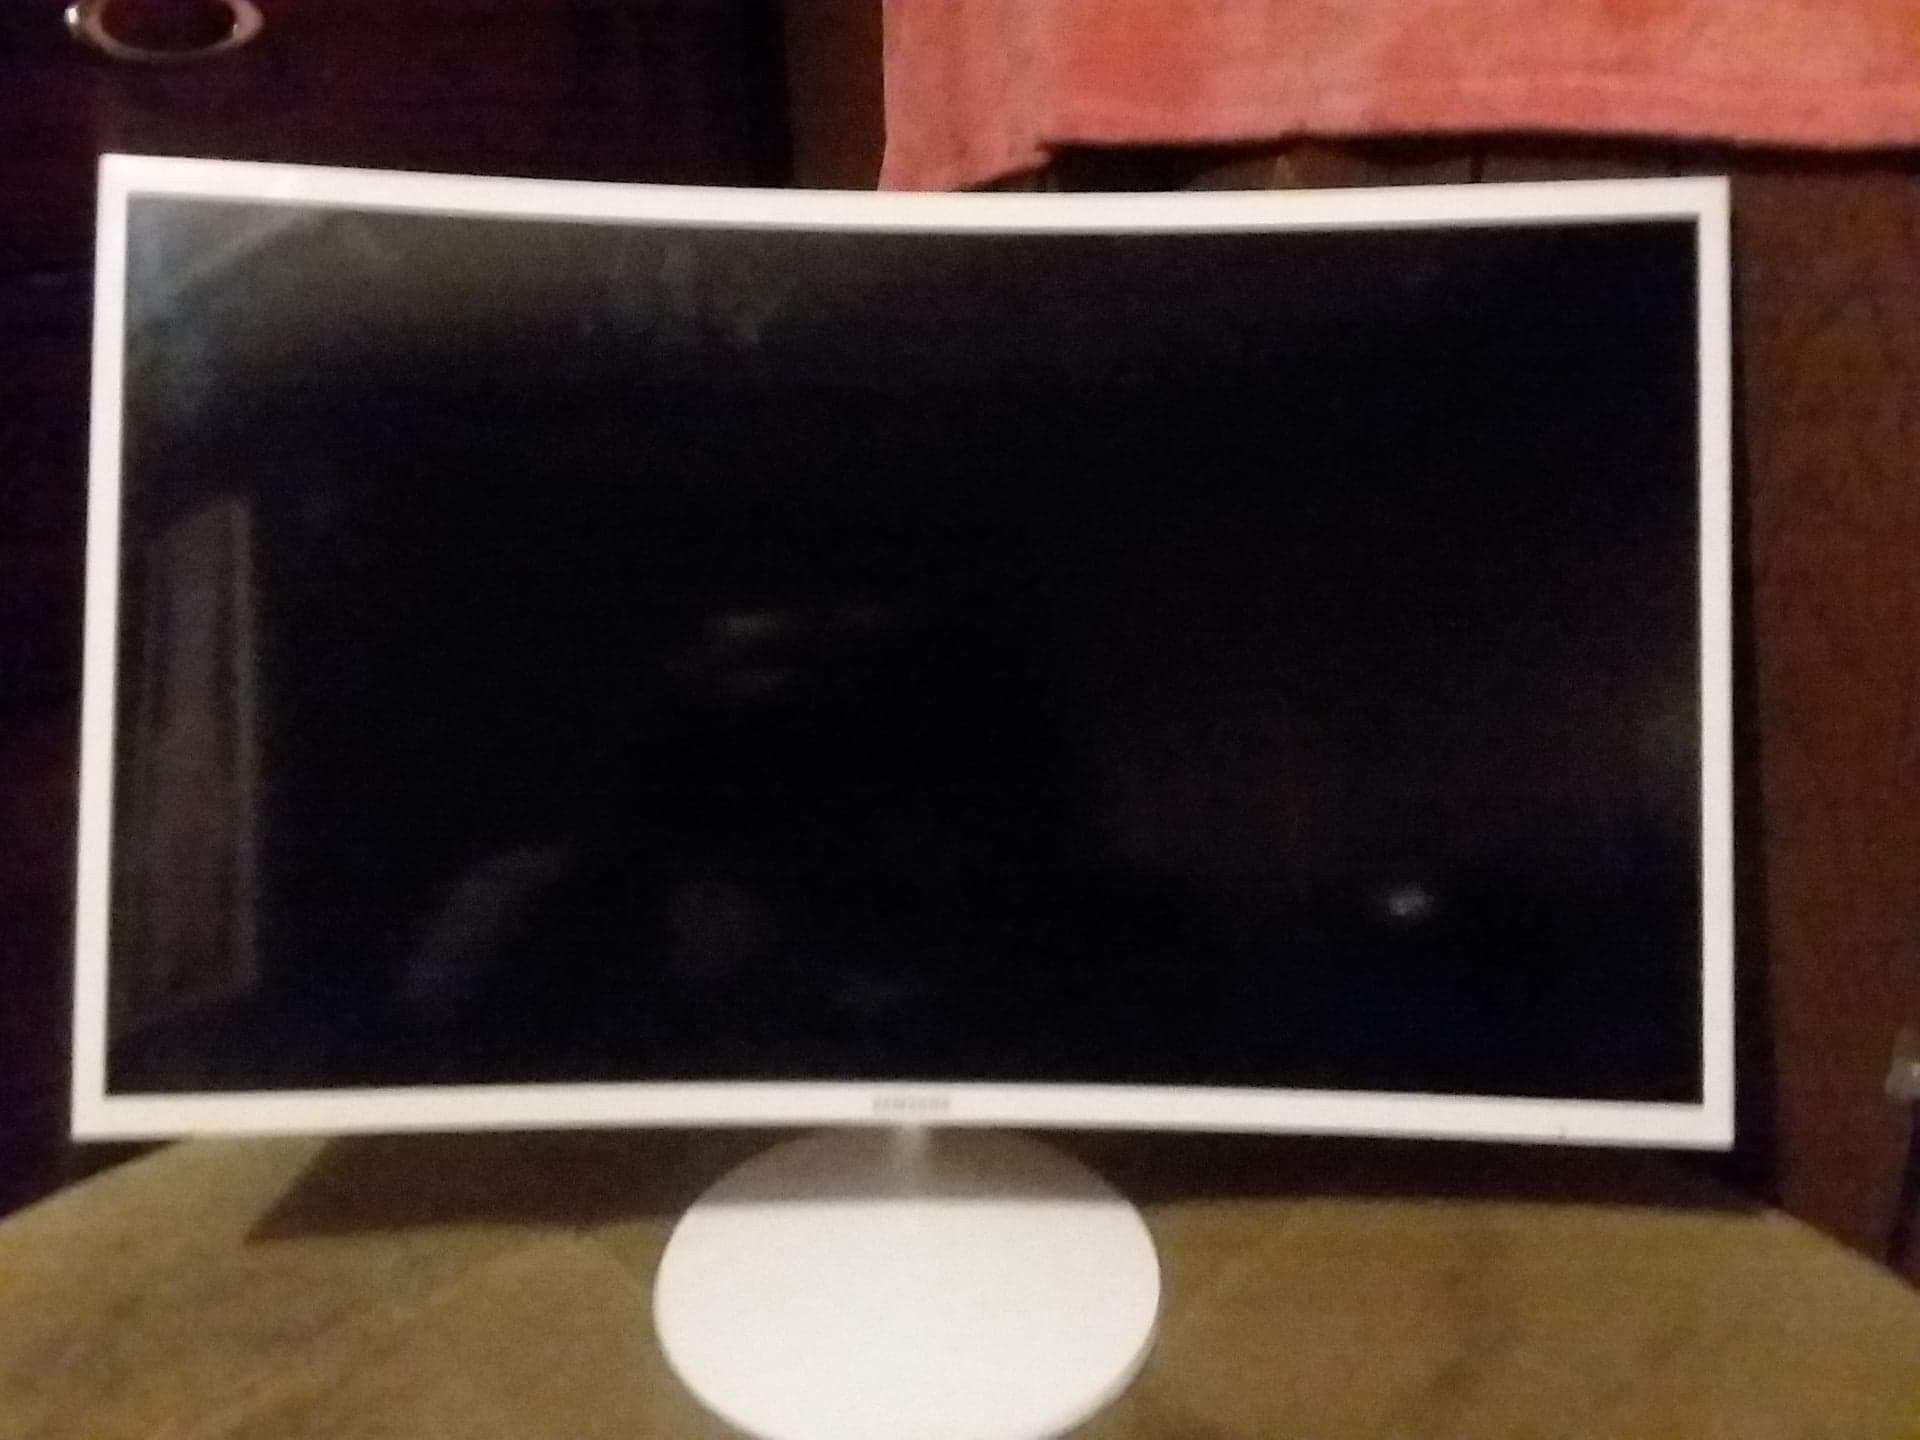 Samsung 27" White Curved LED Computer Monitor